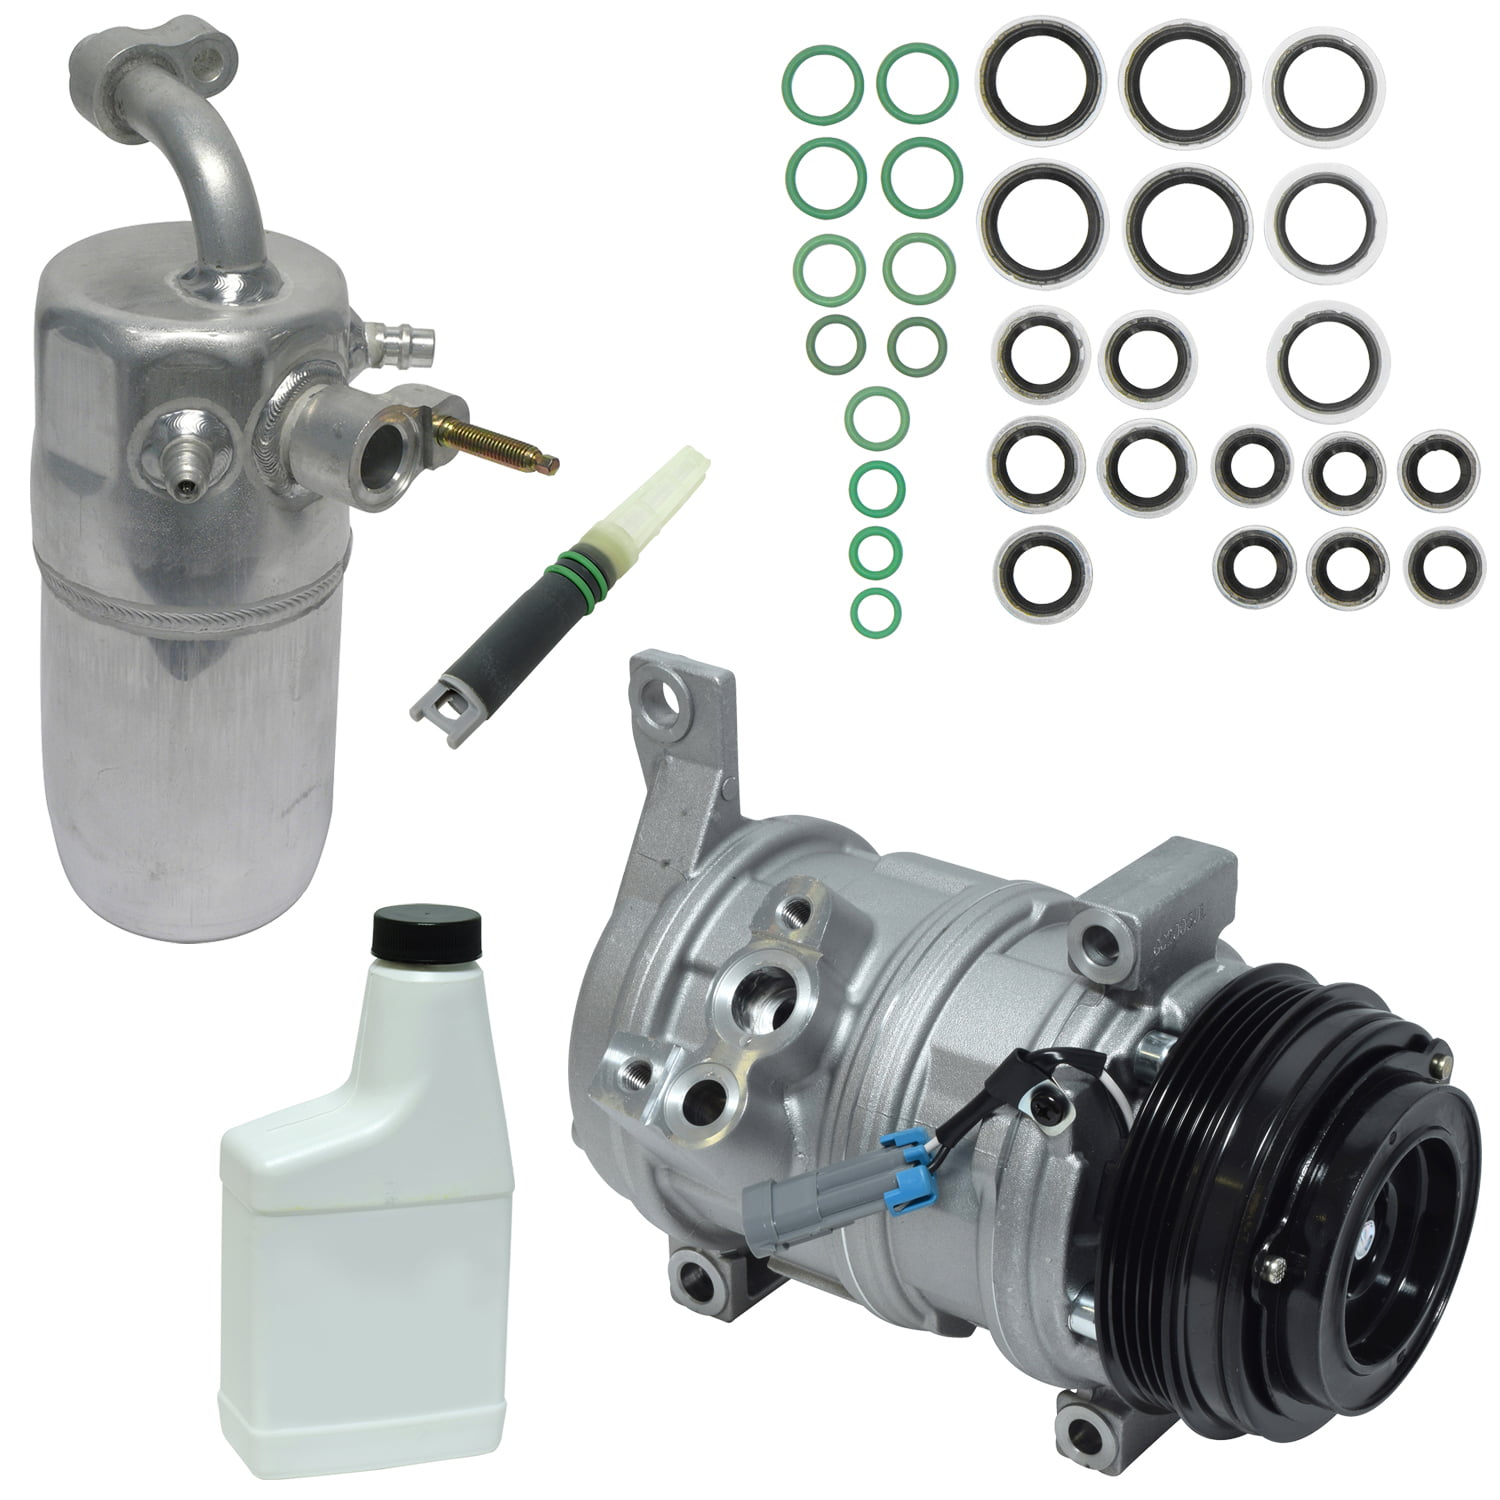 New A/C Compressor and Component Kit for Suburban 1500 Yukon XL 1500 Suburban 25 